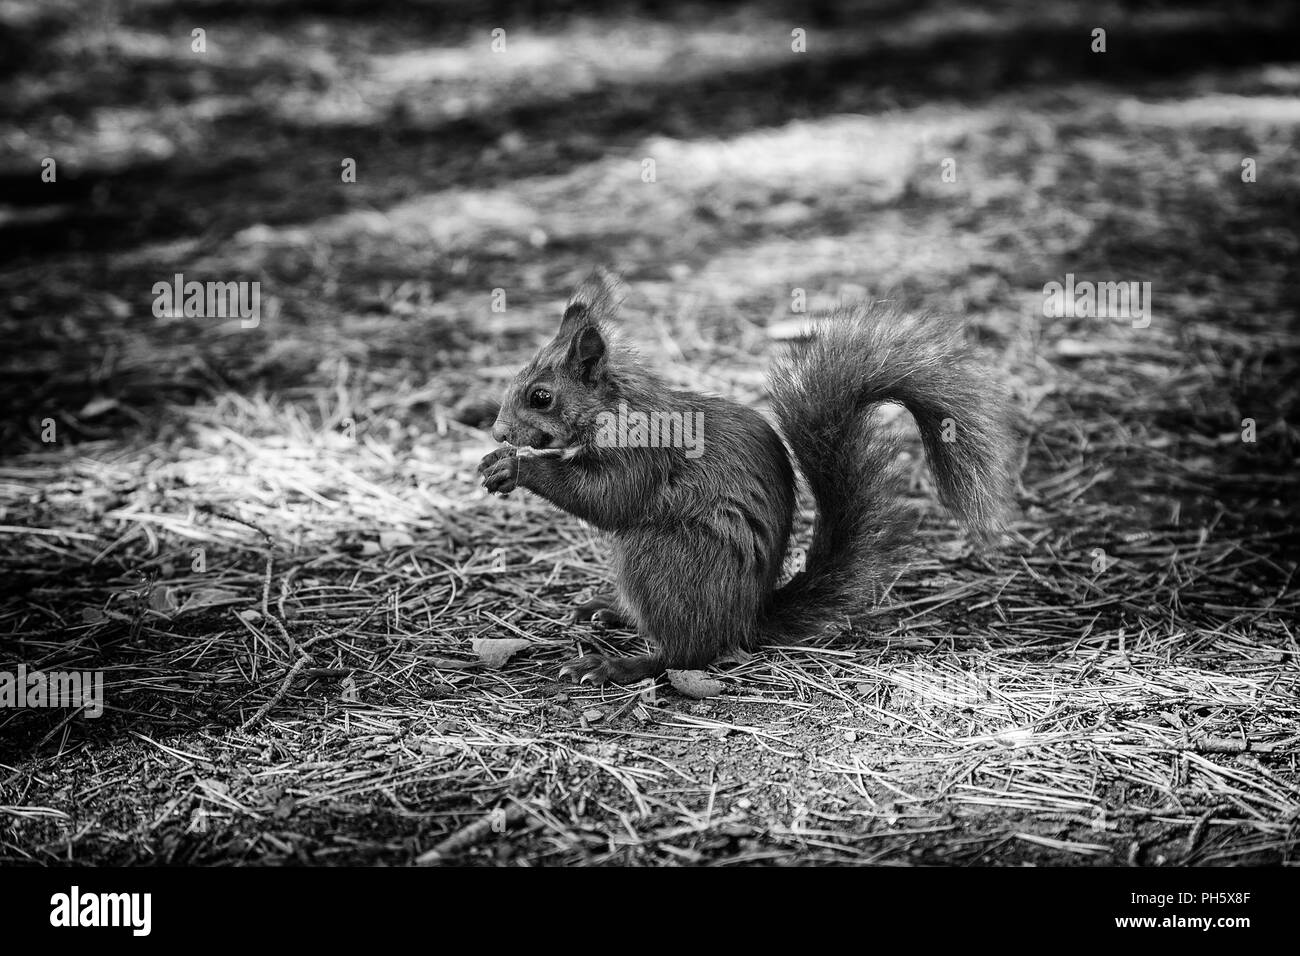 Squirrel in the forest, detail of wild animal in freedom, nature Stock Photo